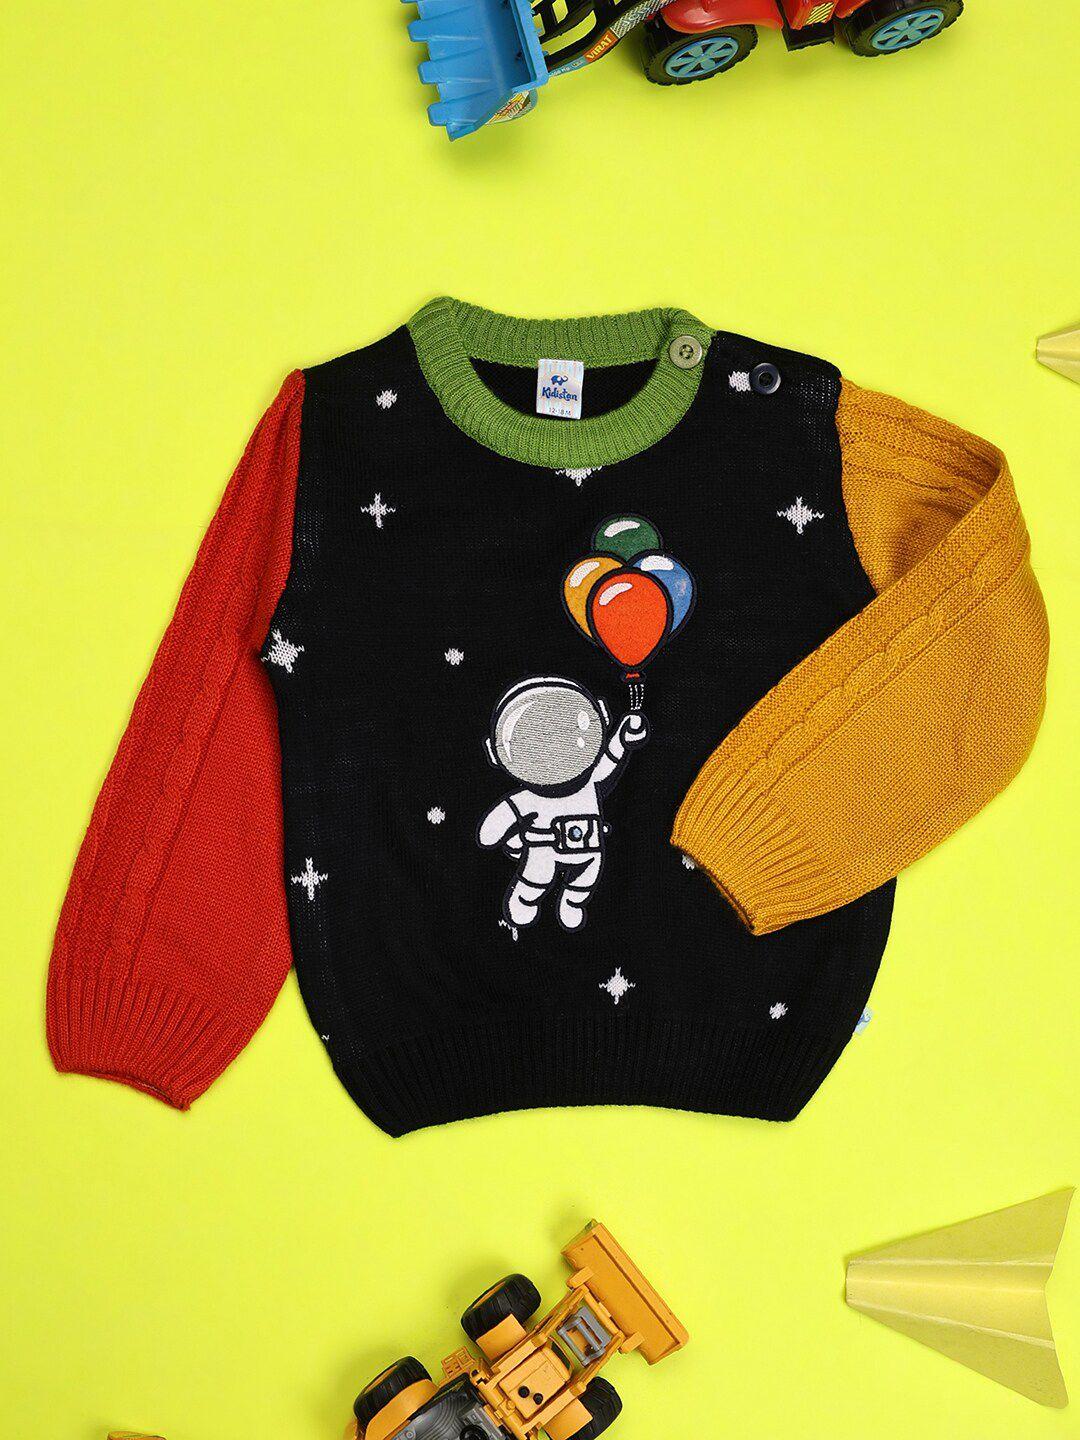 v-mart-infants-graphic-printed-acrylic-pullover-sweater